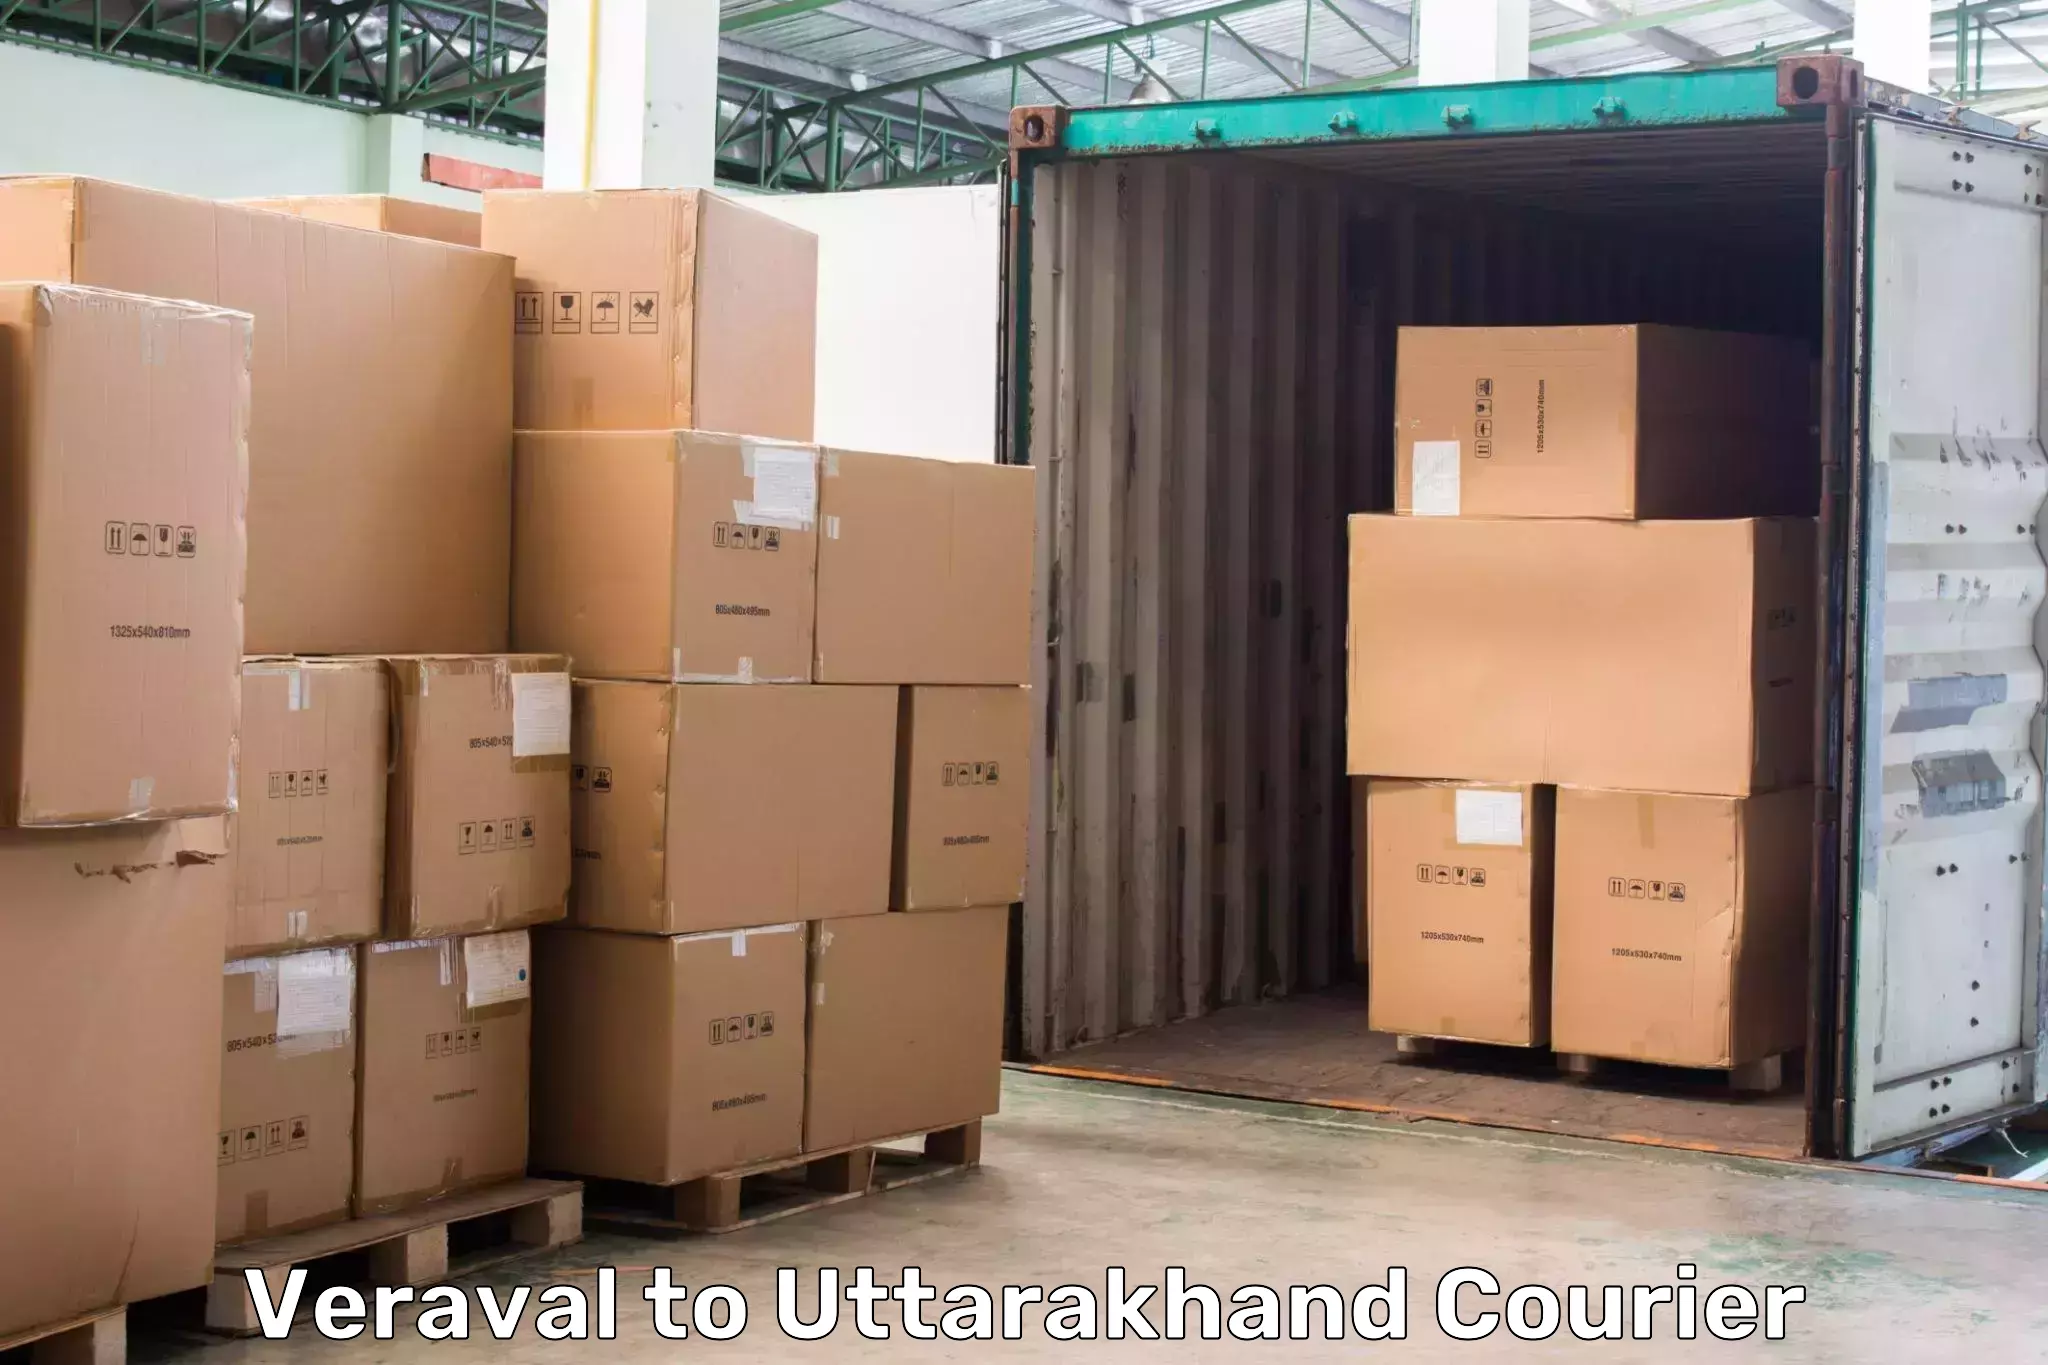 Reliable shipping partners Veraval to Pauri Garhwal